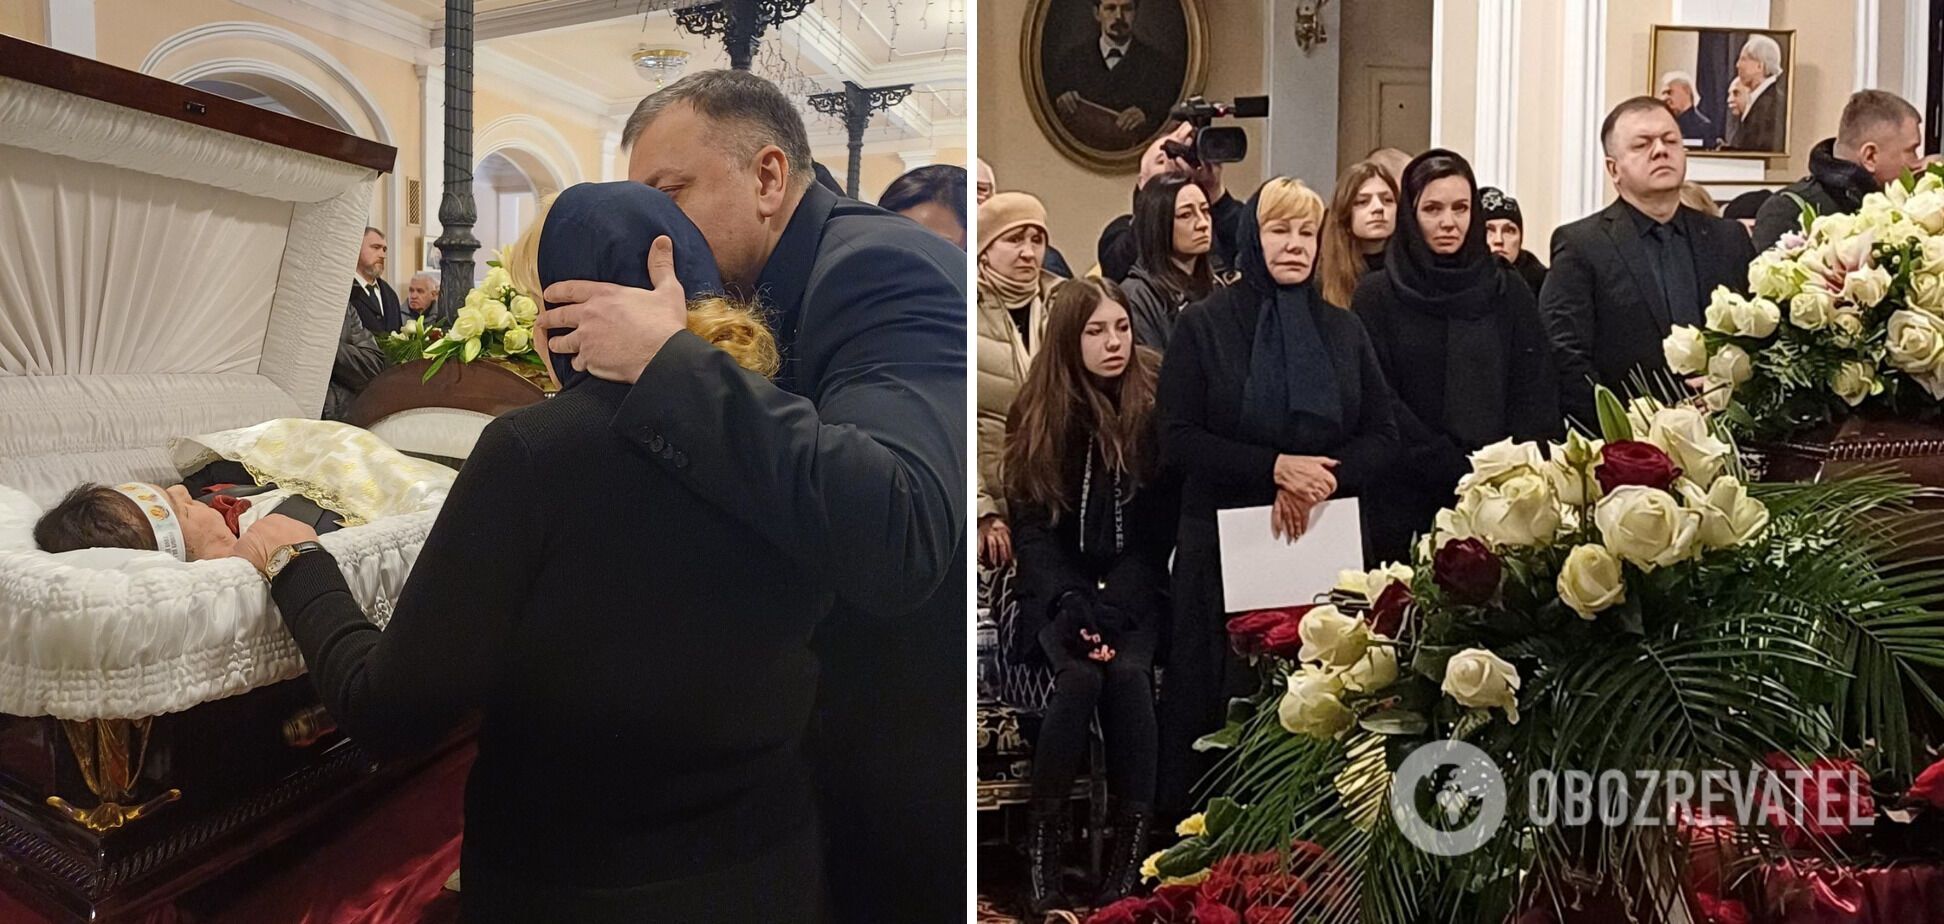 ''He lived freely'': stars shared personal stories about Vitalii Belonozhko at the farewell ceremony